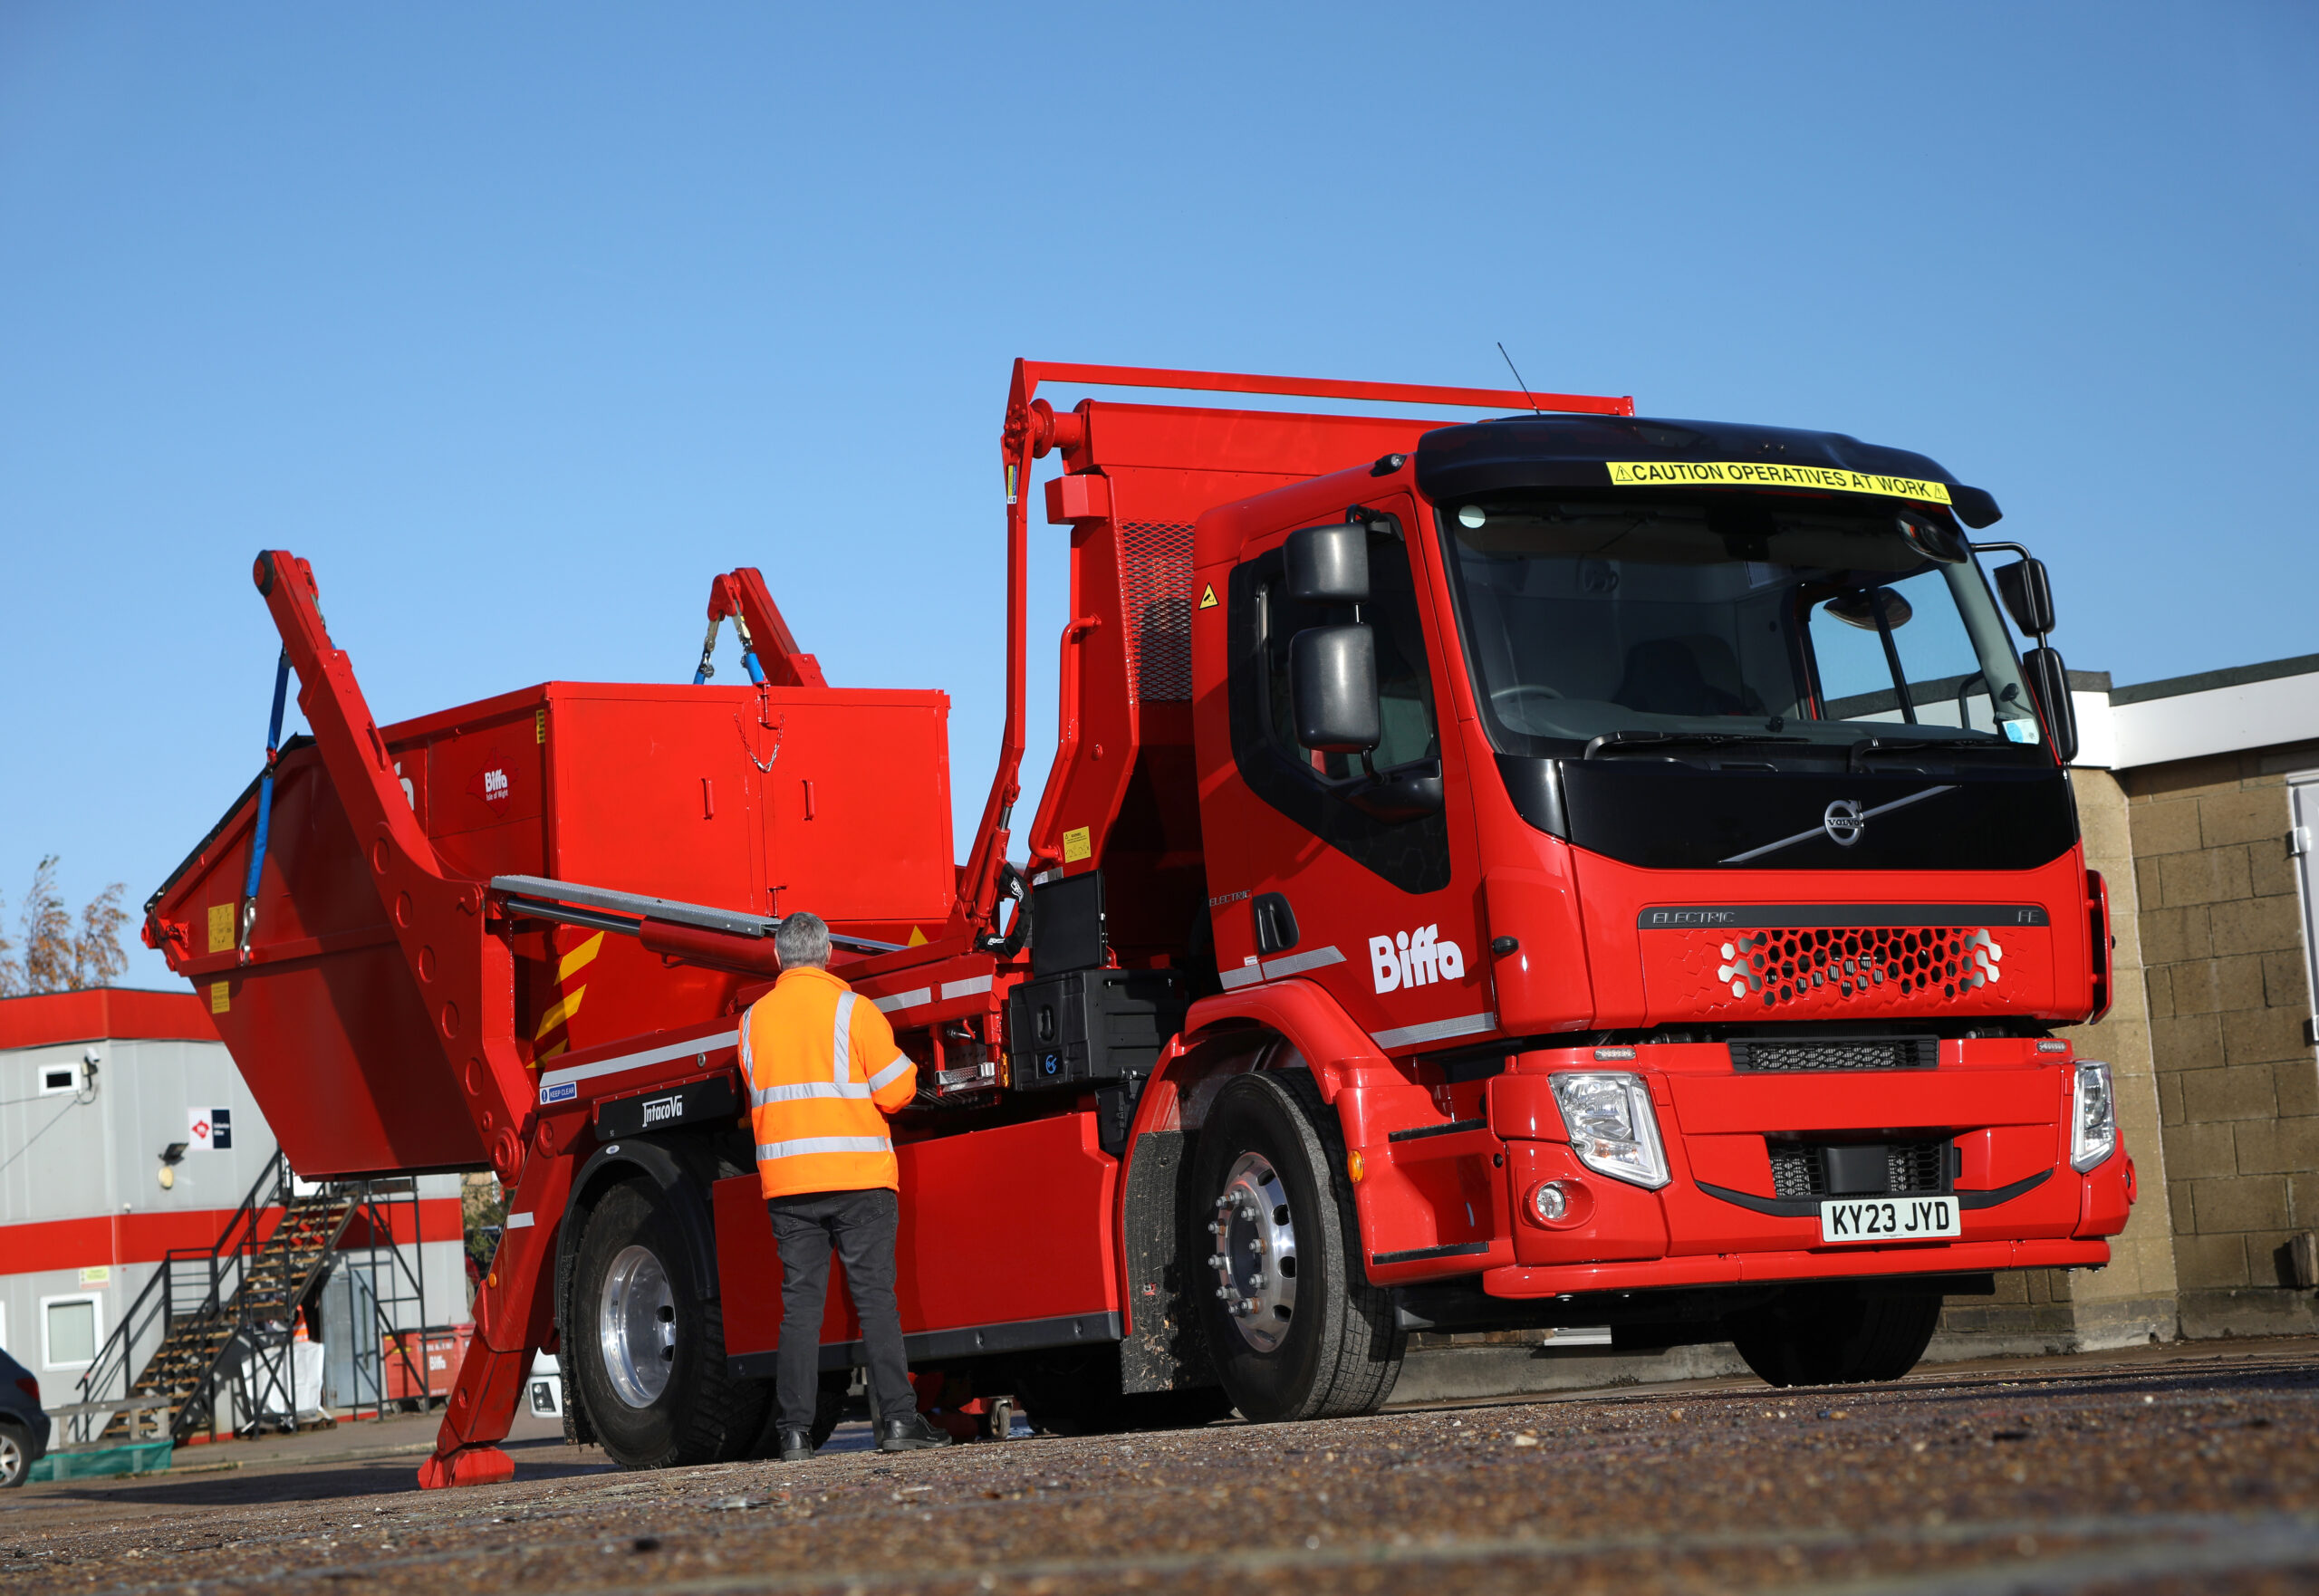 Biffa to rollout its first electric skip loader after deal with Volvo